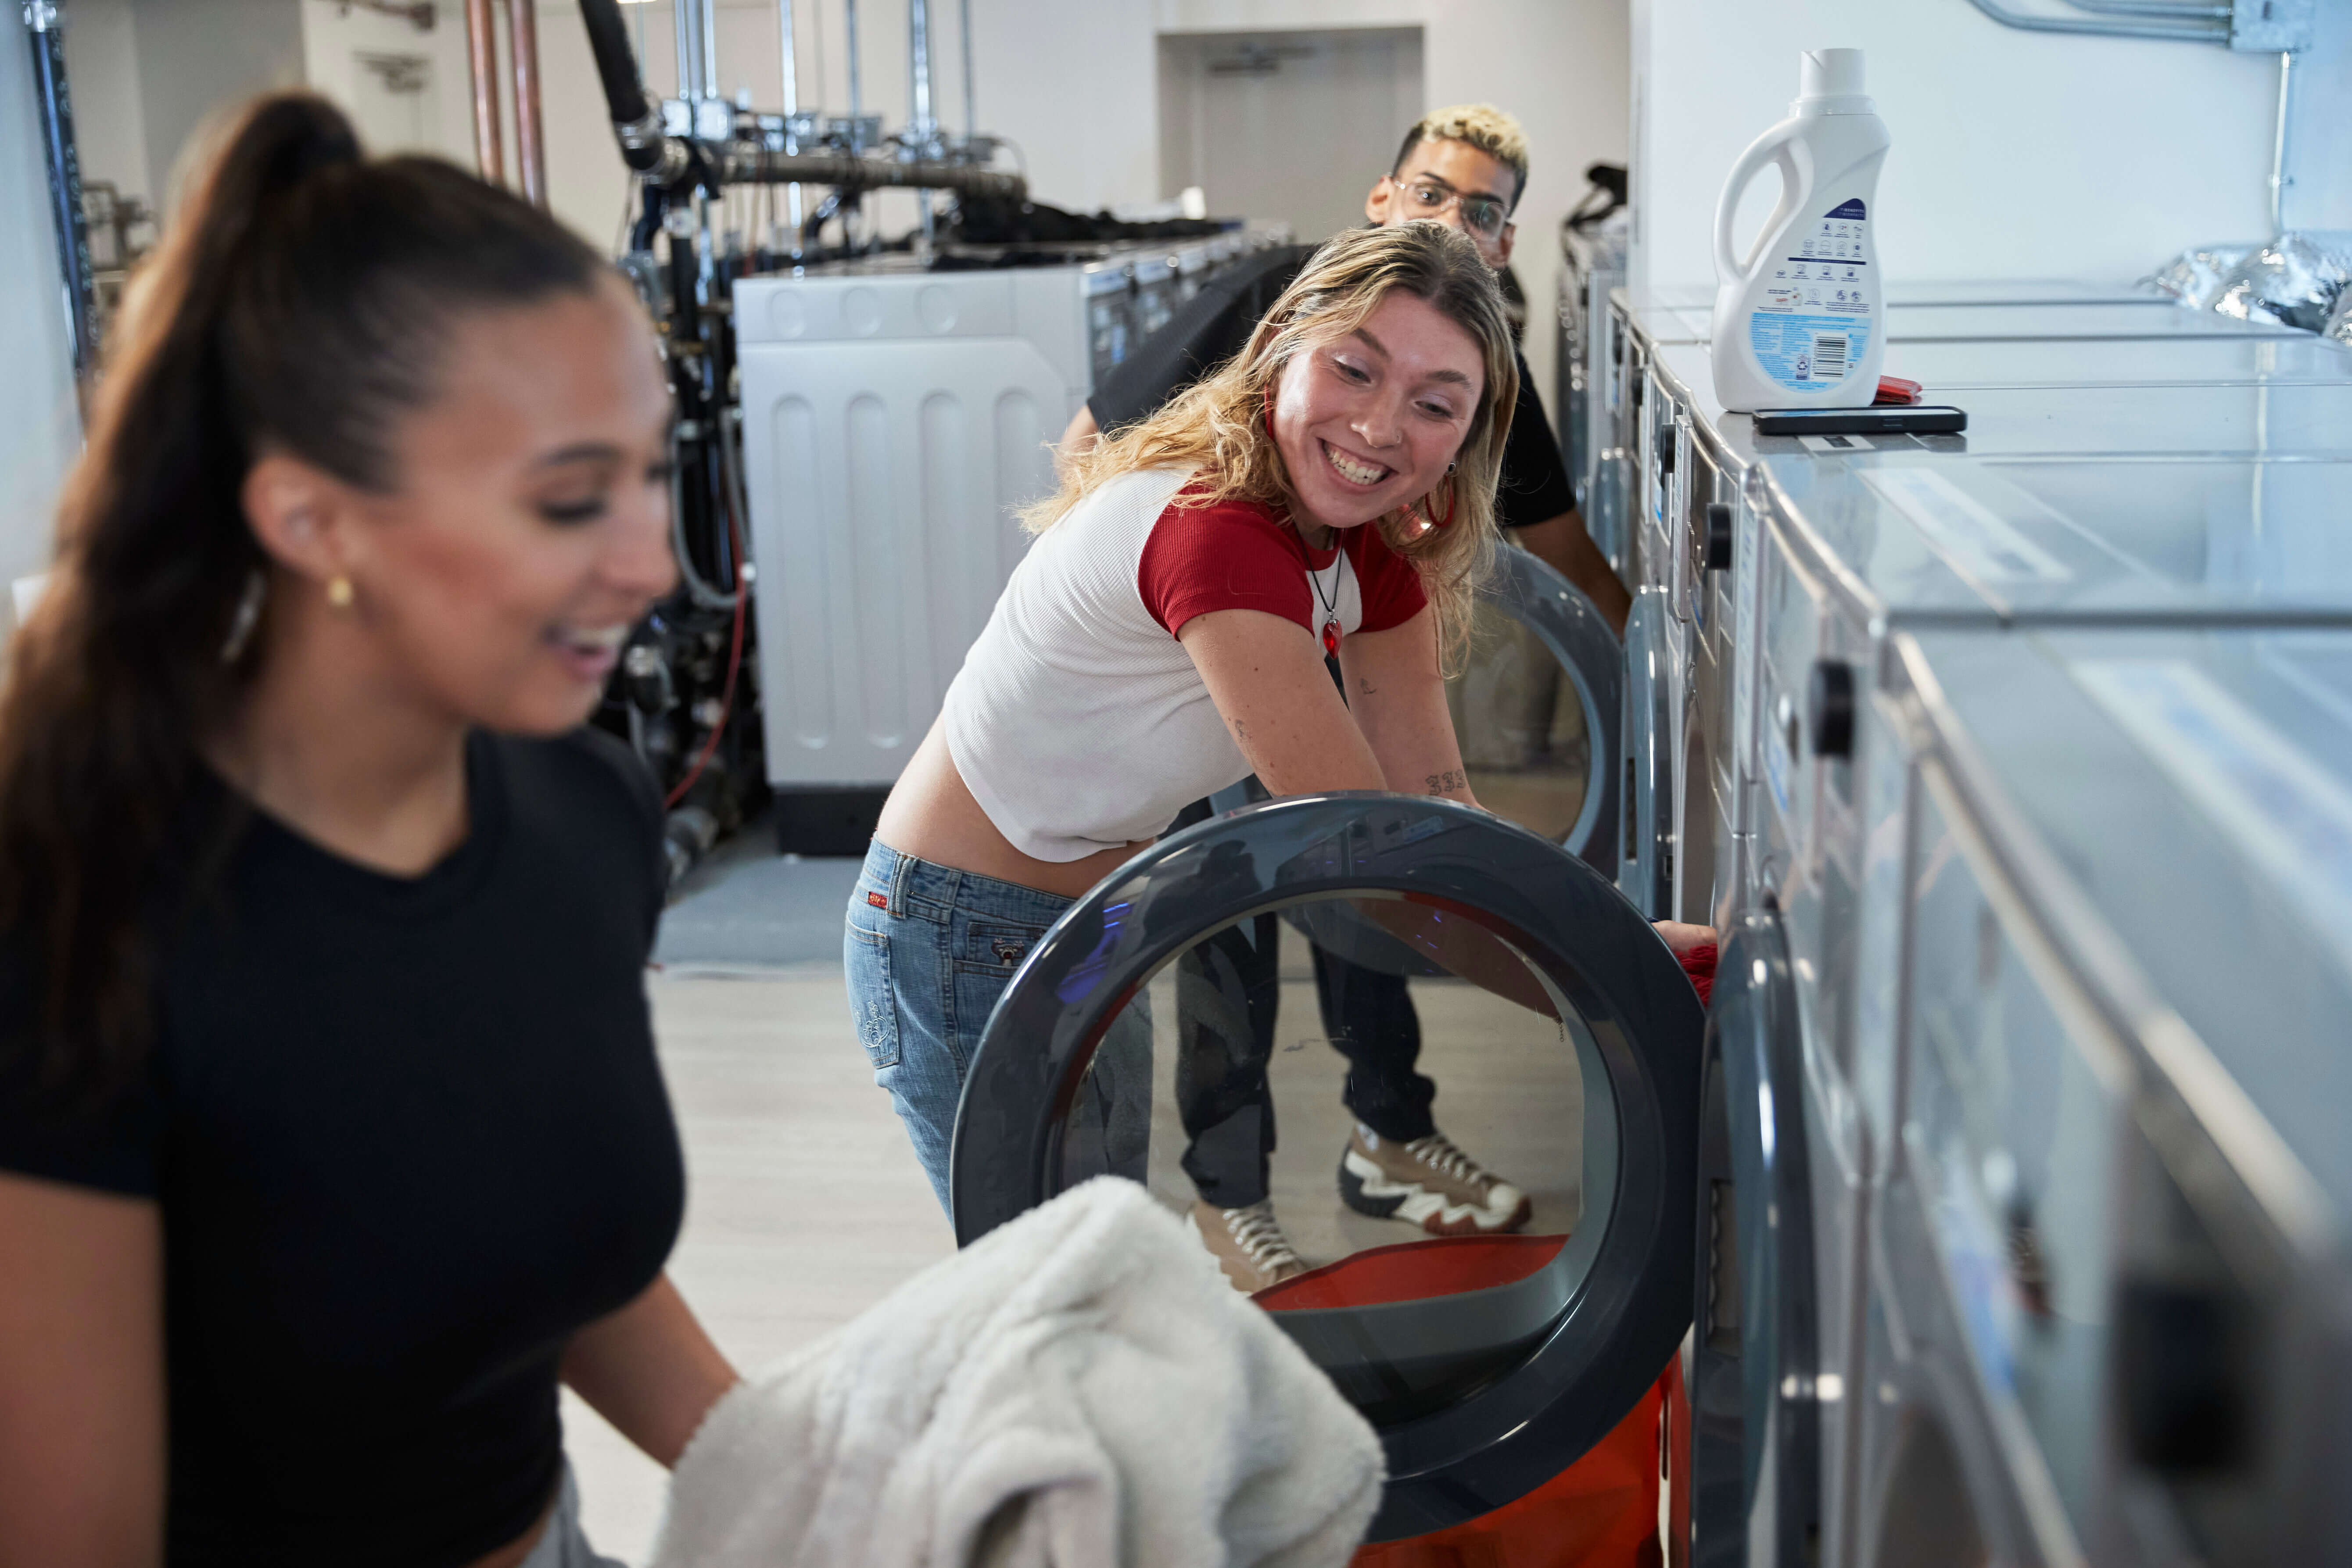 People doing laundry in FOUND Study laundry room